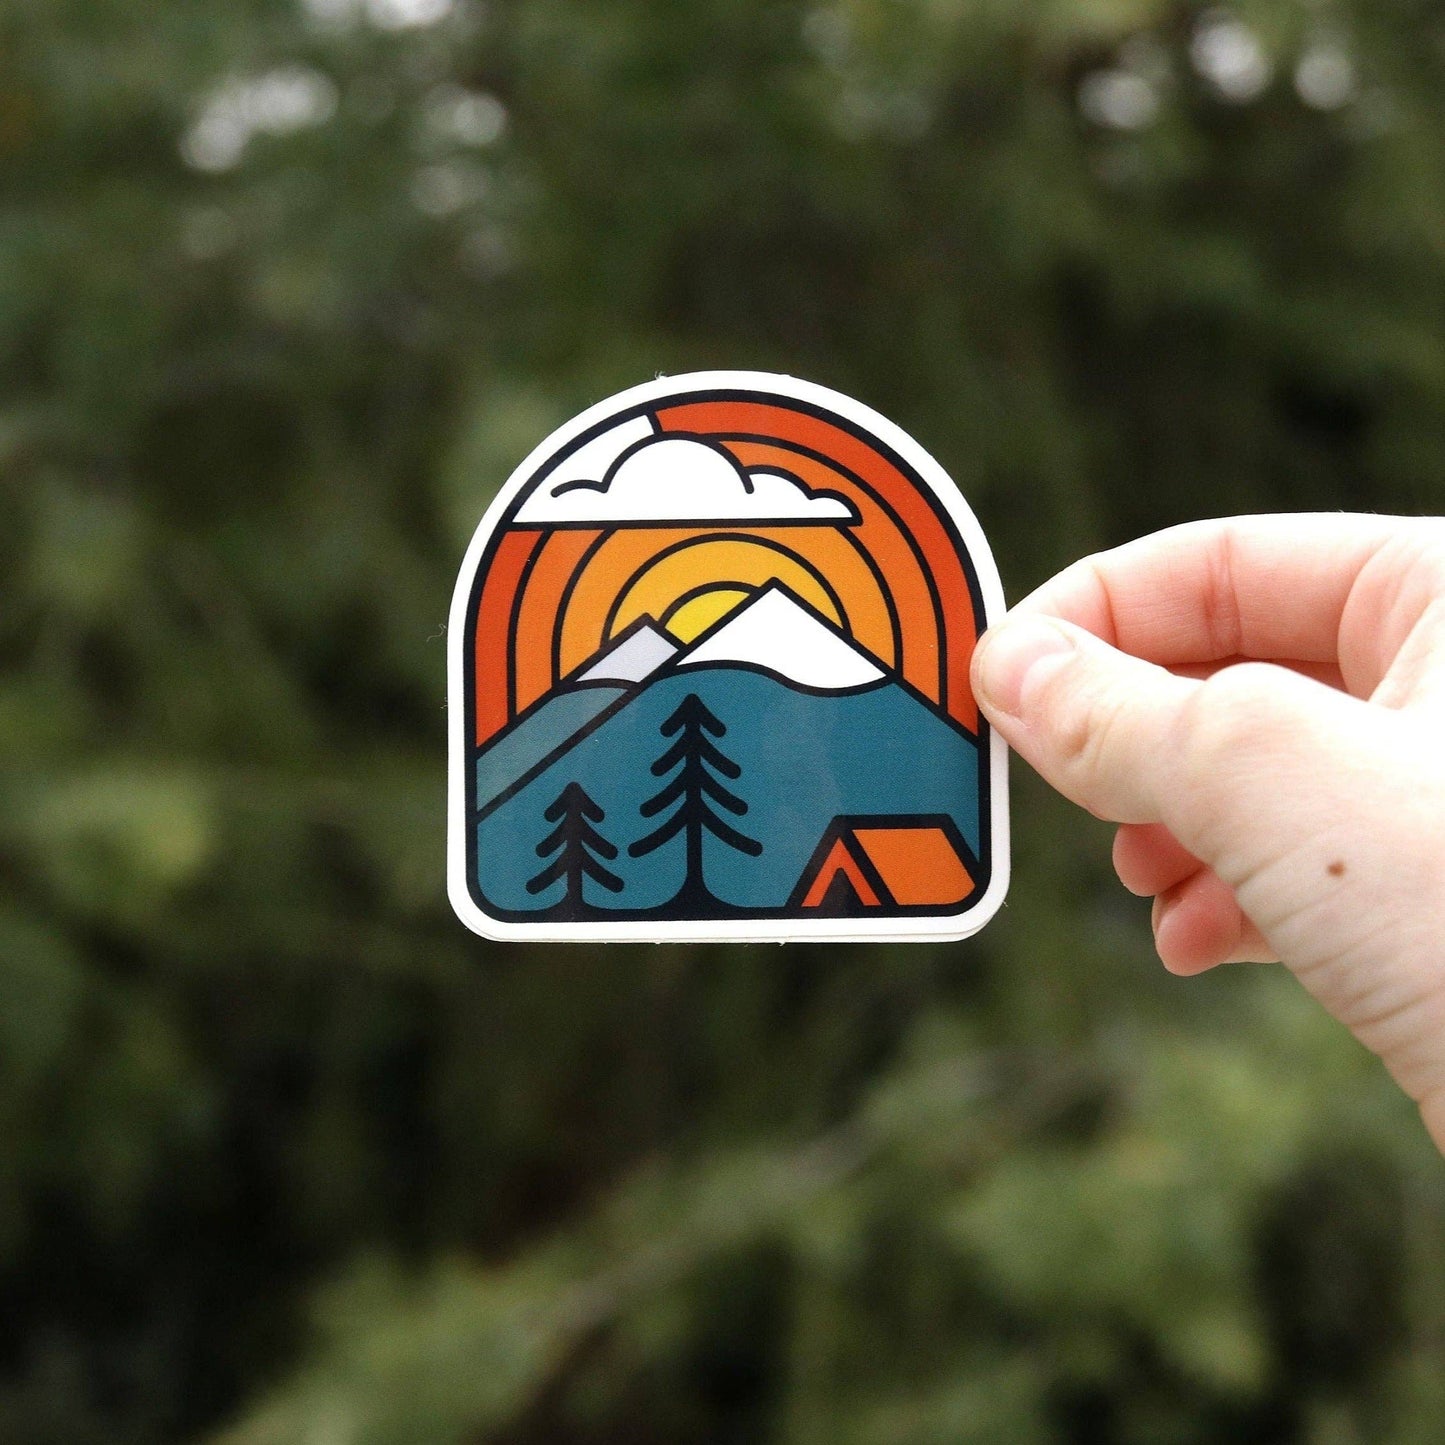 Sunset Campsite Sticker | Camping Decal | Waterproof Vinyl UV resistant Sticker for adventures outdoors - Storm and Sky Shoppe - Squatchy